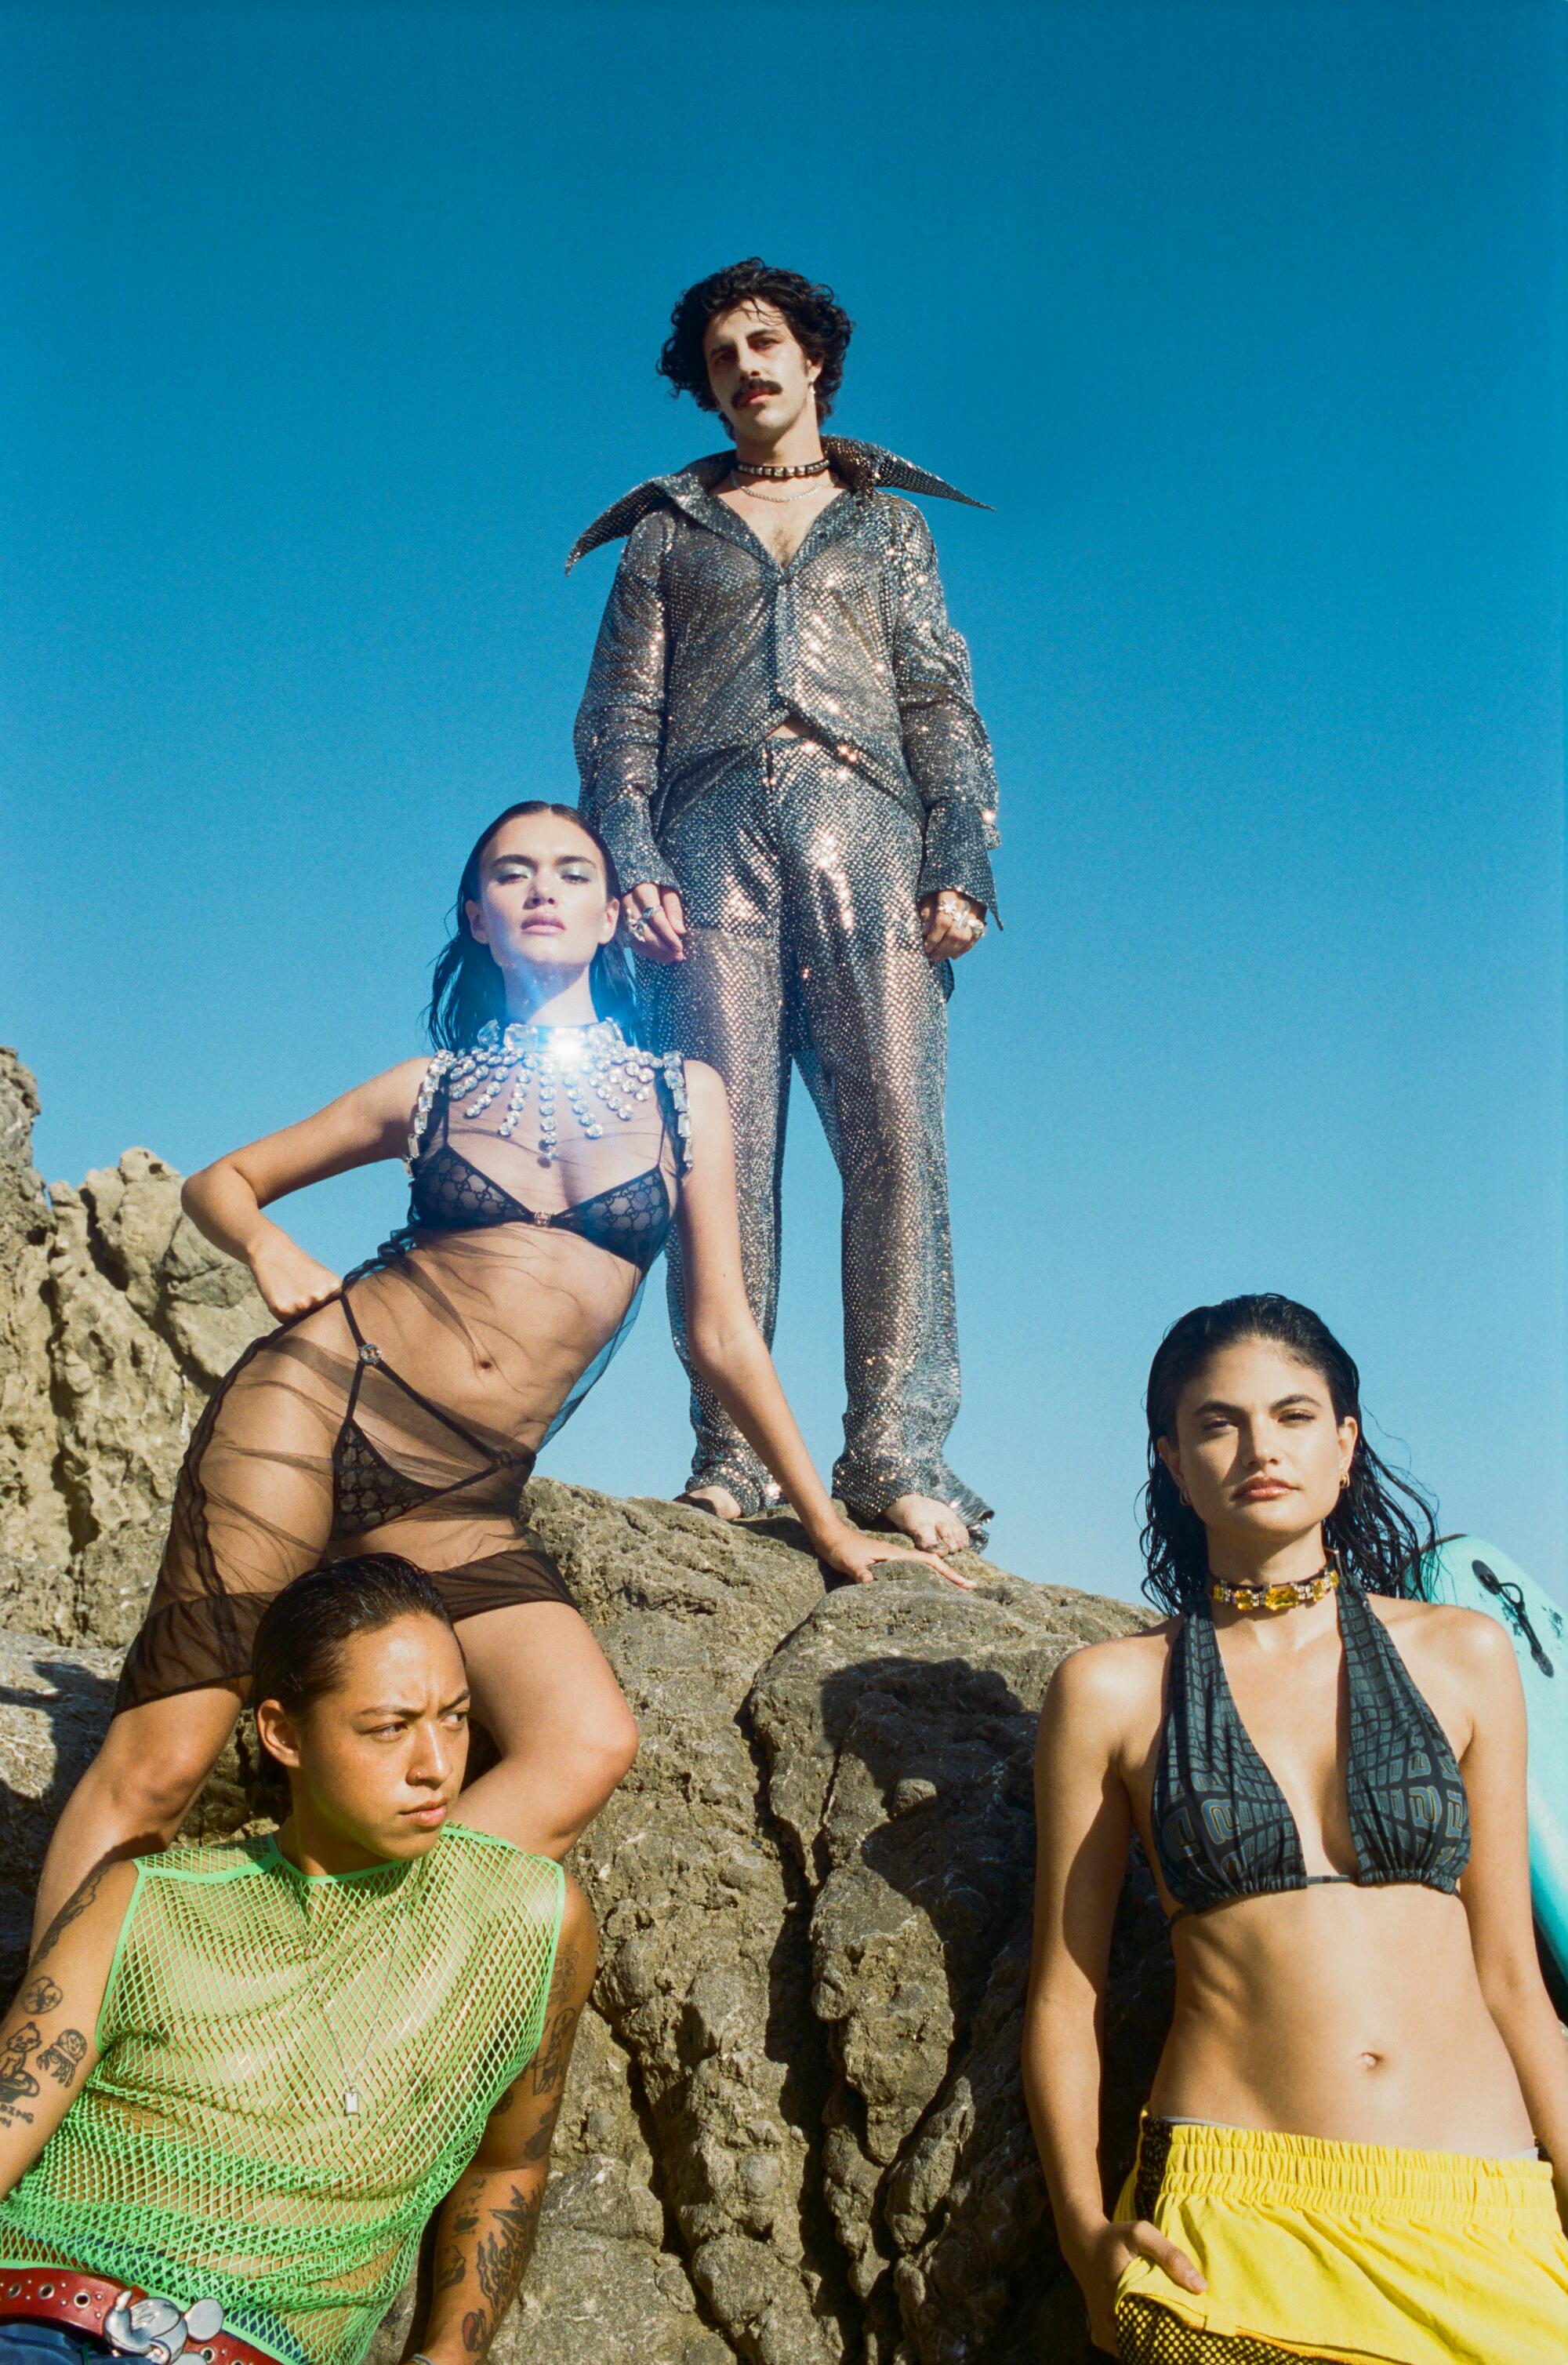 Four people wearing colorful, glittery outfits stand at the top and base of a rock on the beach.